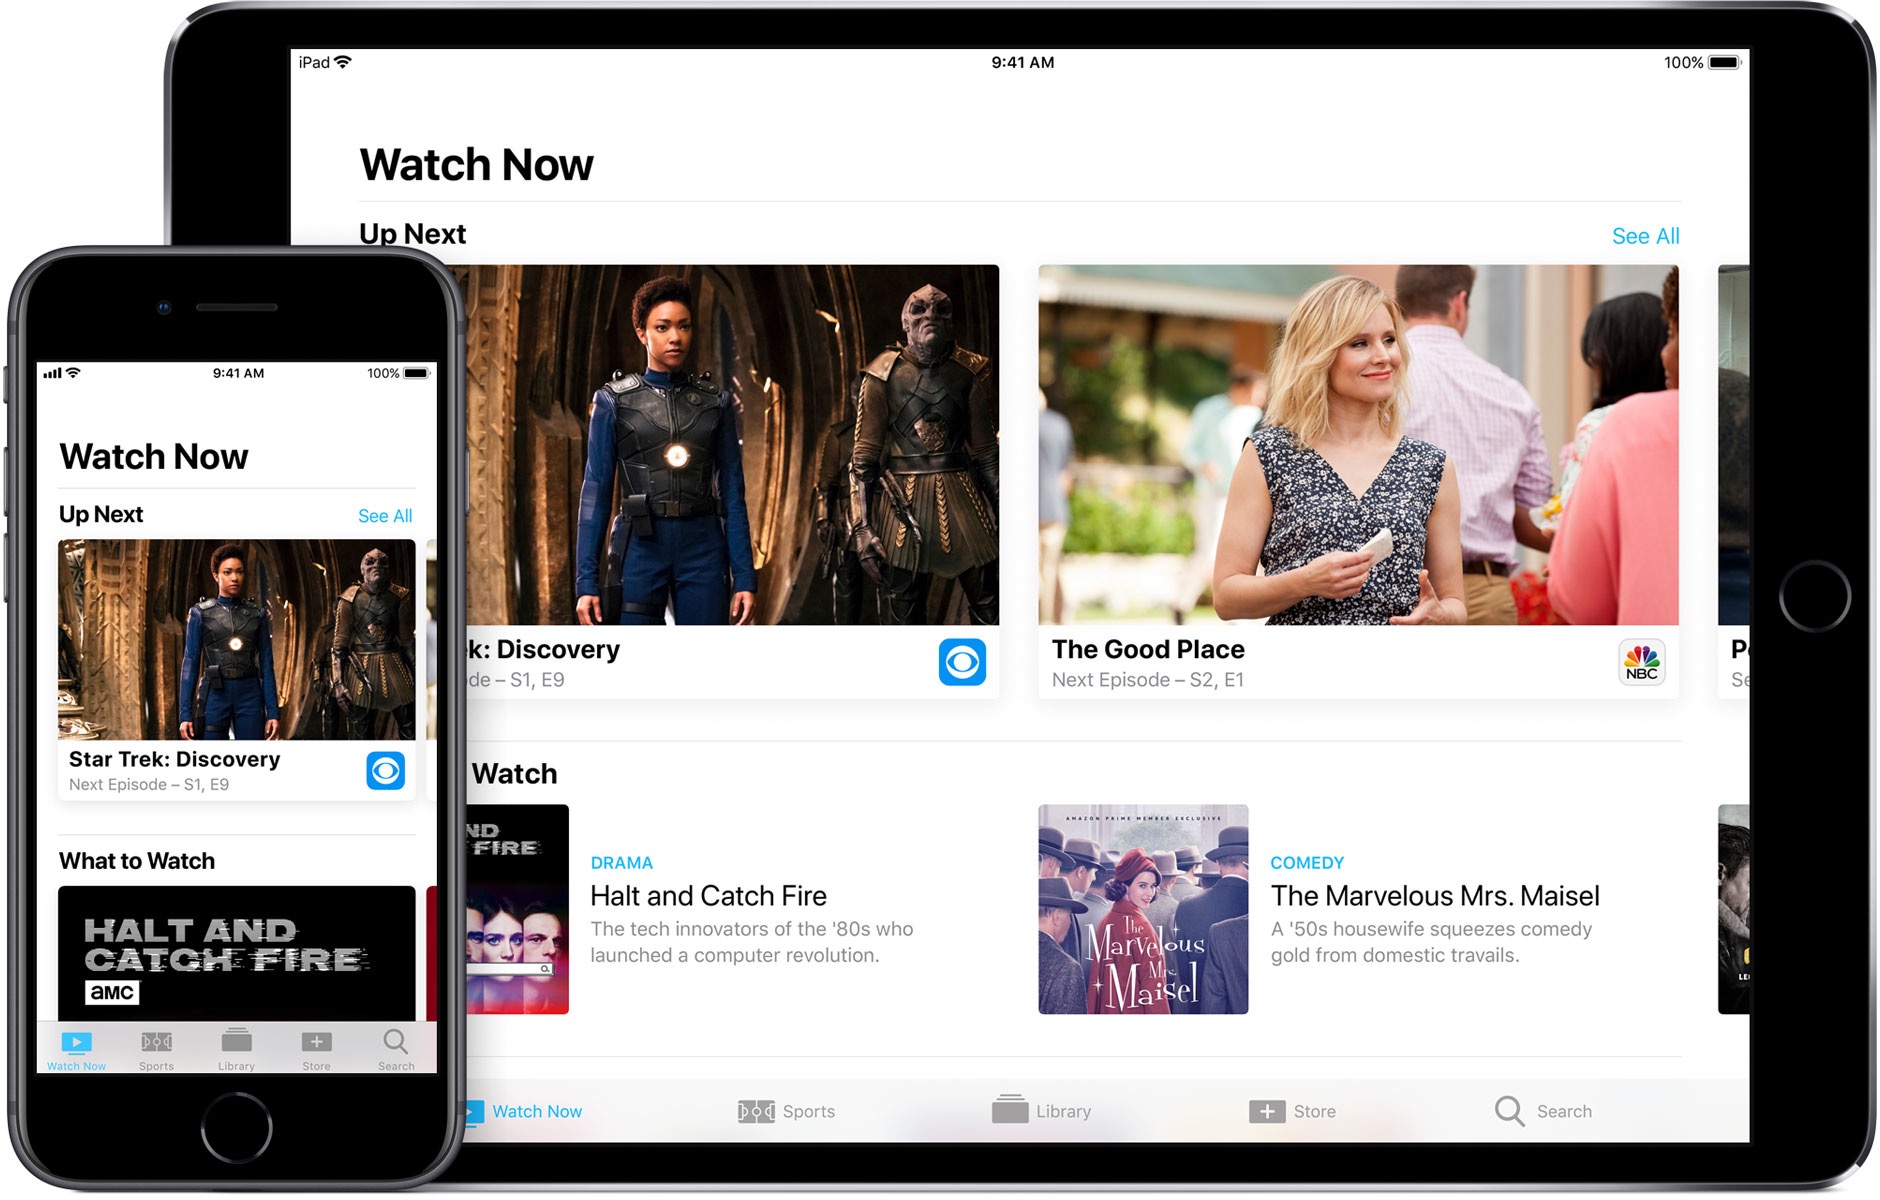 Apple disapproves display of explicit content in original series